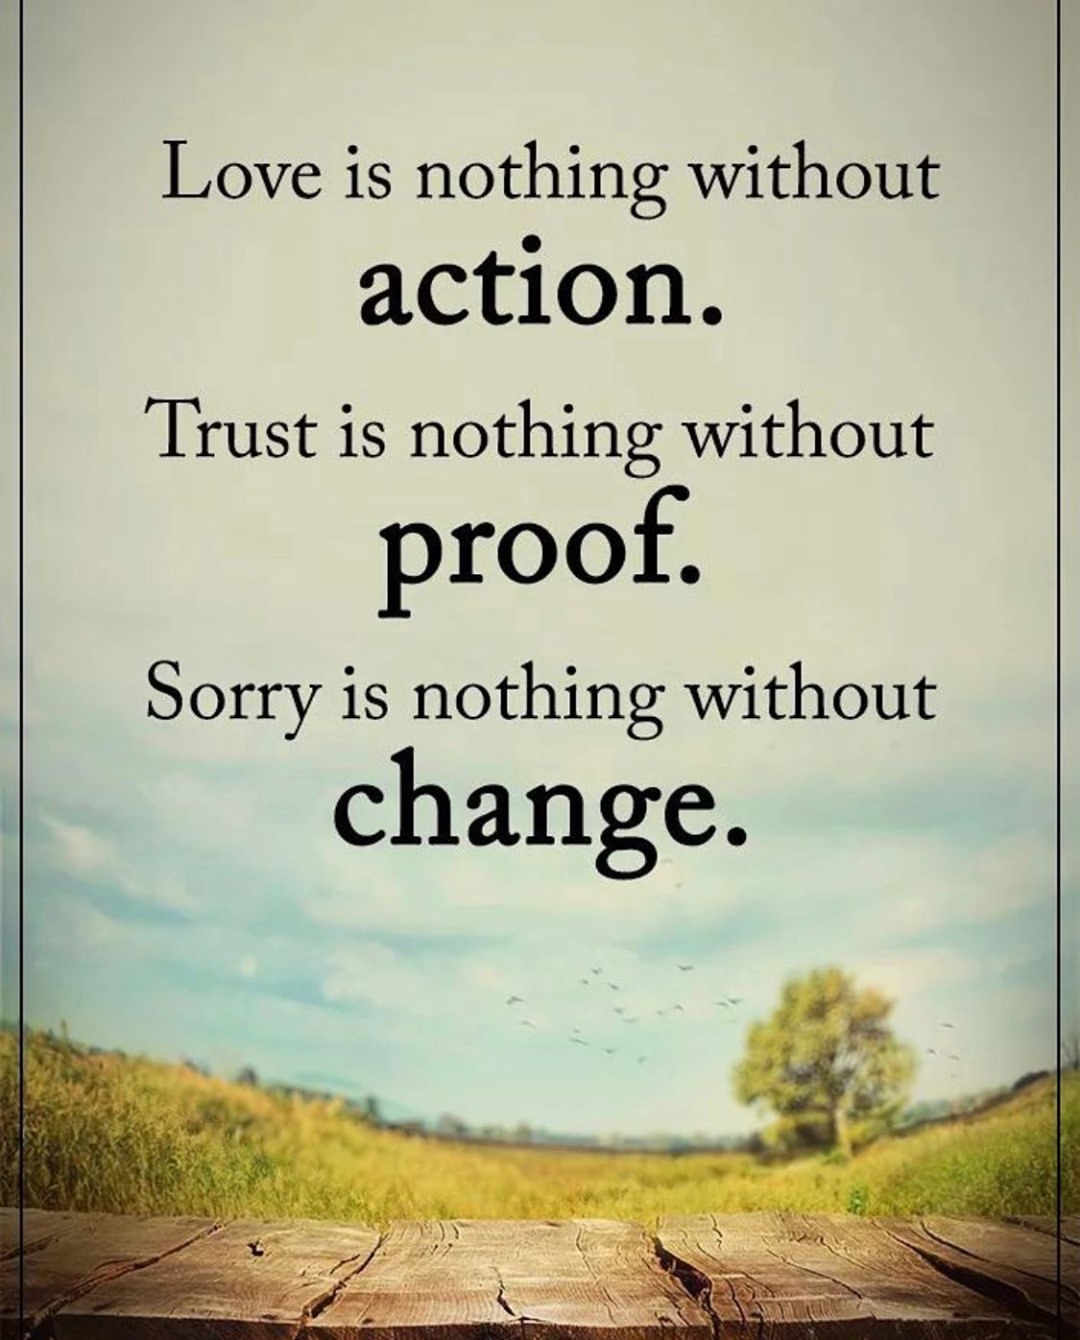 Love is nothing without action. Trust is nothing without proof. Sorry is nothing without change.